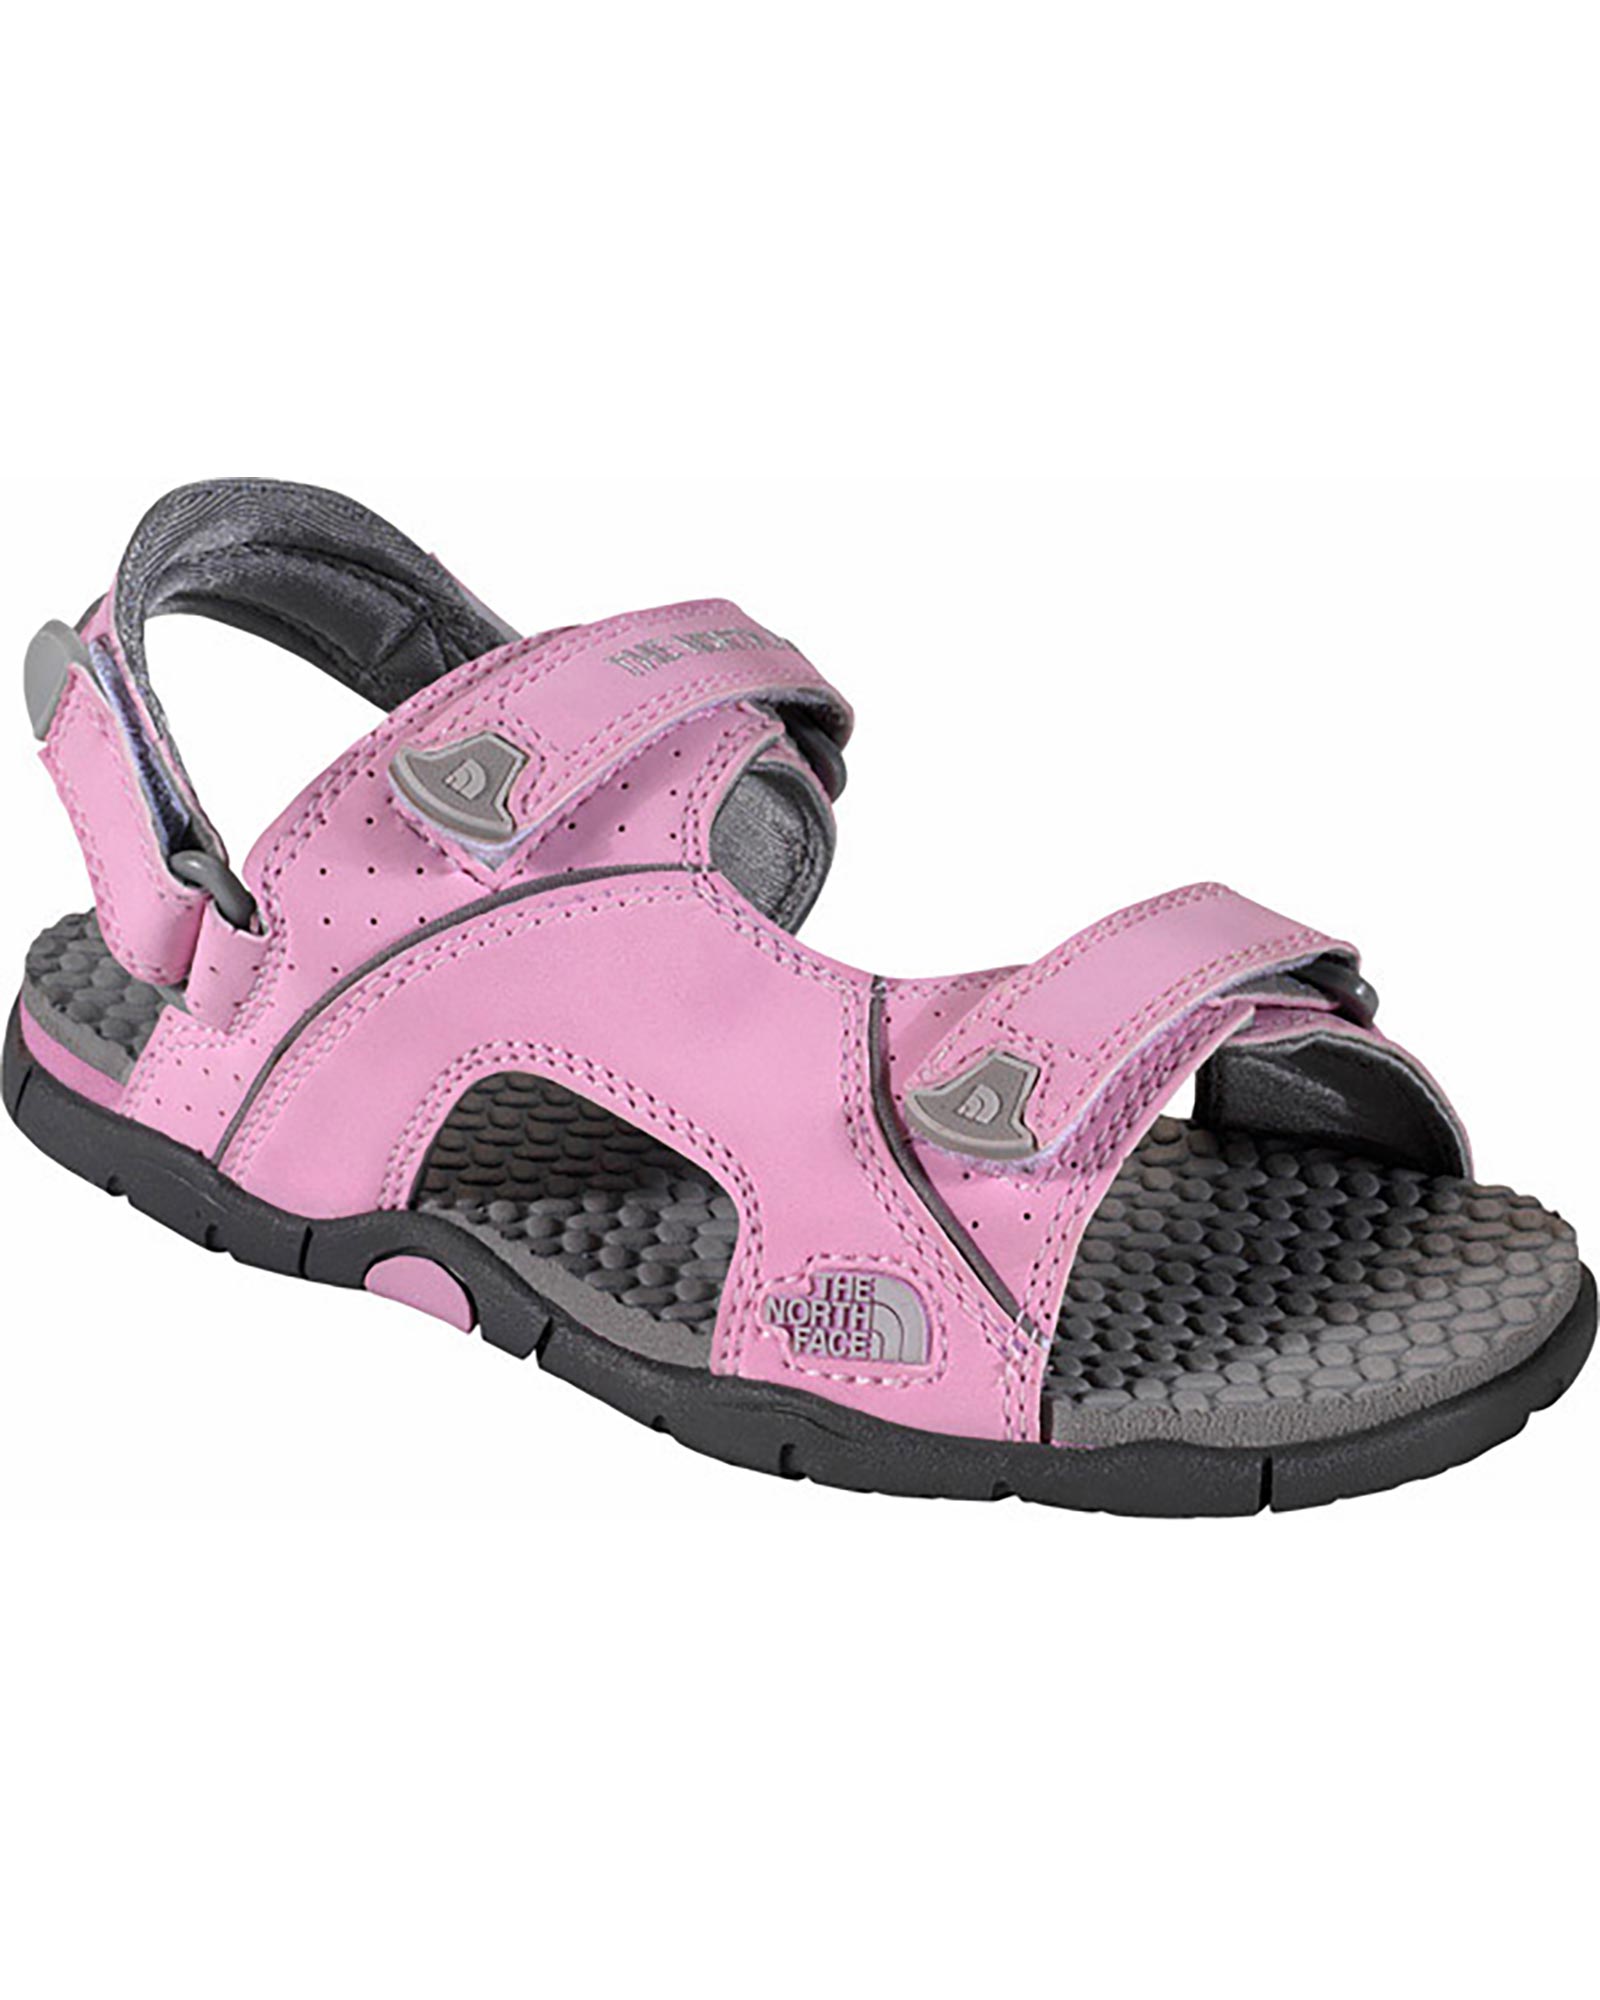 The North Face El Rio Girls’ Sandals - Pink Lady/Windchime Grey UK 3